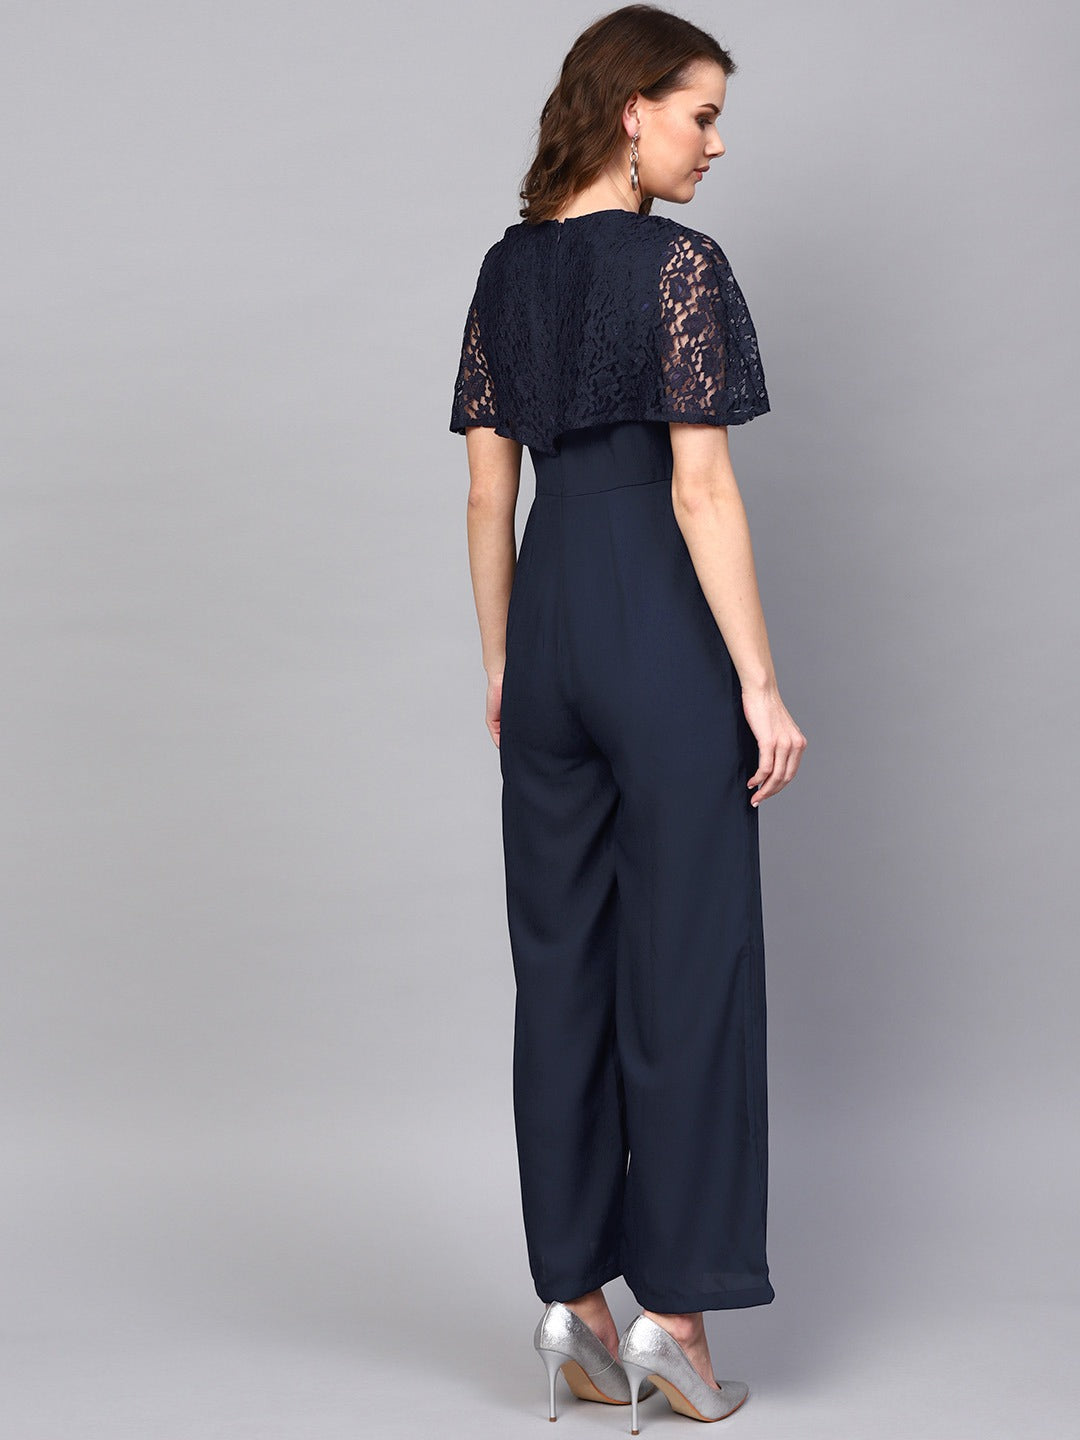 Navy Layered Lace Jumpsuit